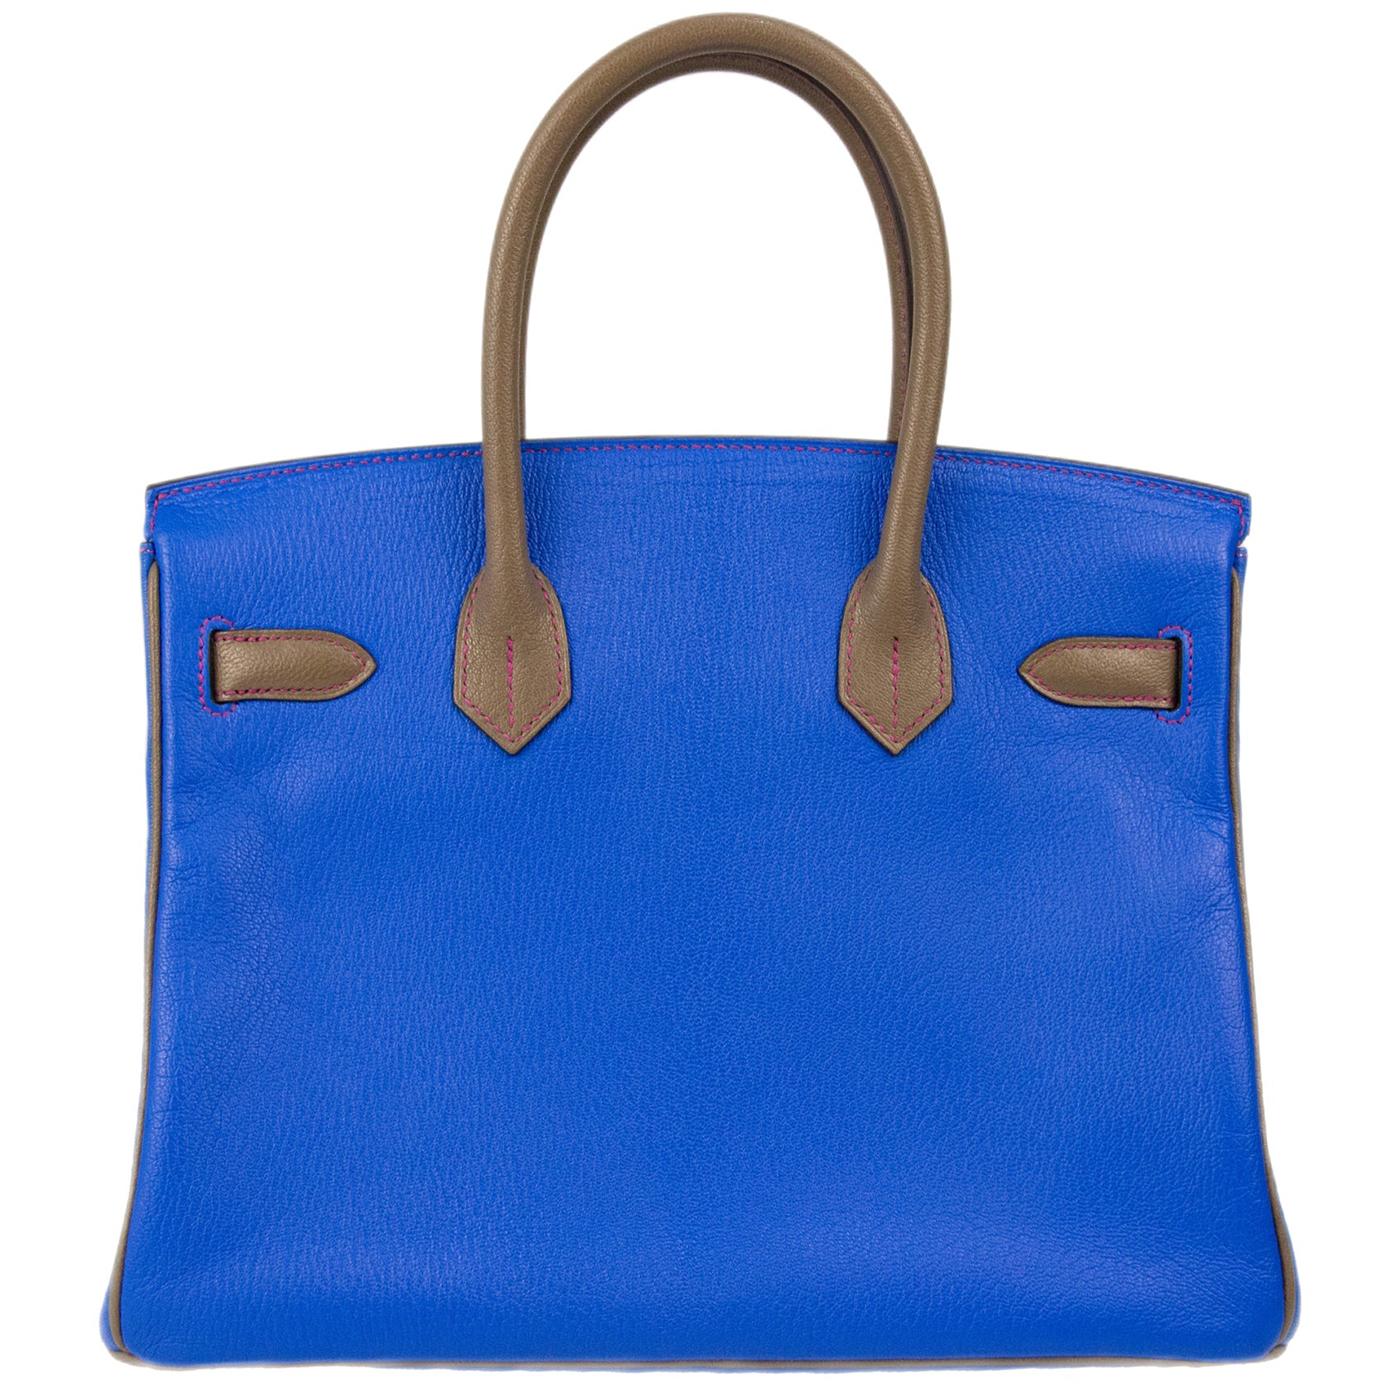 Hermes Birkin HSS 30 Electric Blue Etoupe Chevre with Gold Hardware In Excellent Condition For Sale In Aventura, FL